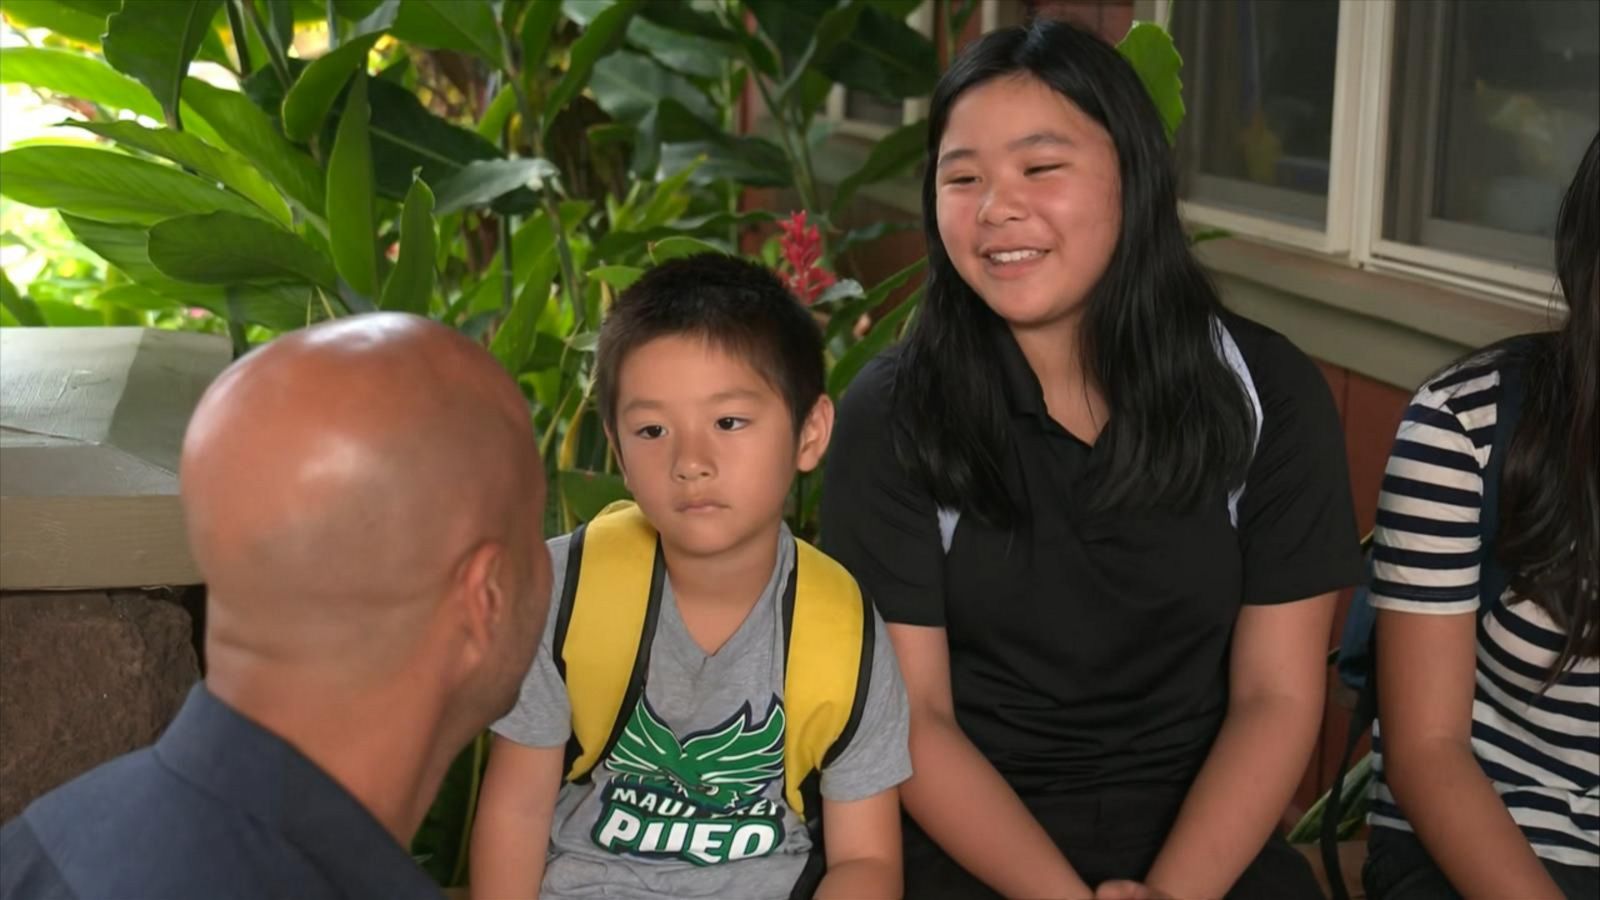 VIDEO: Students return to school in Maui